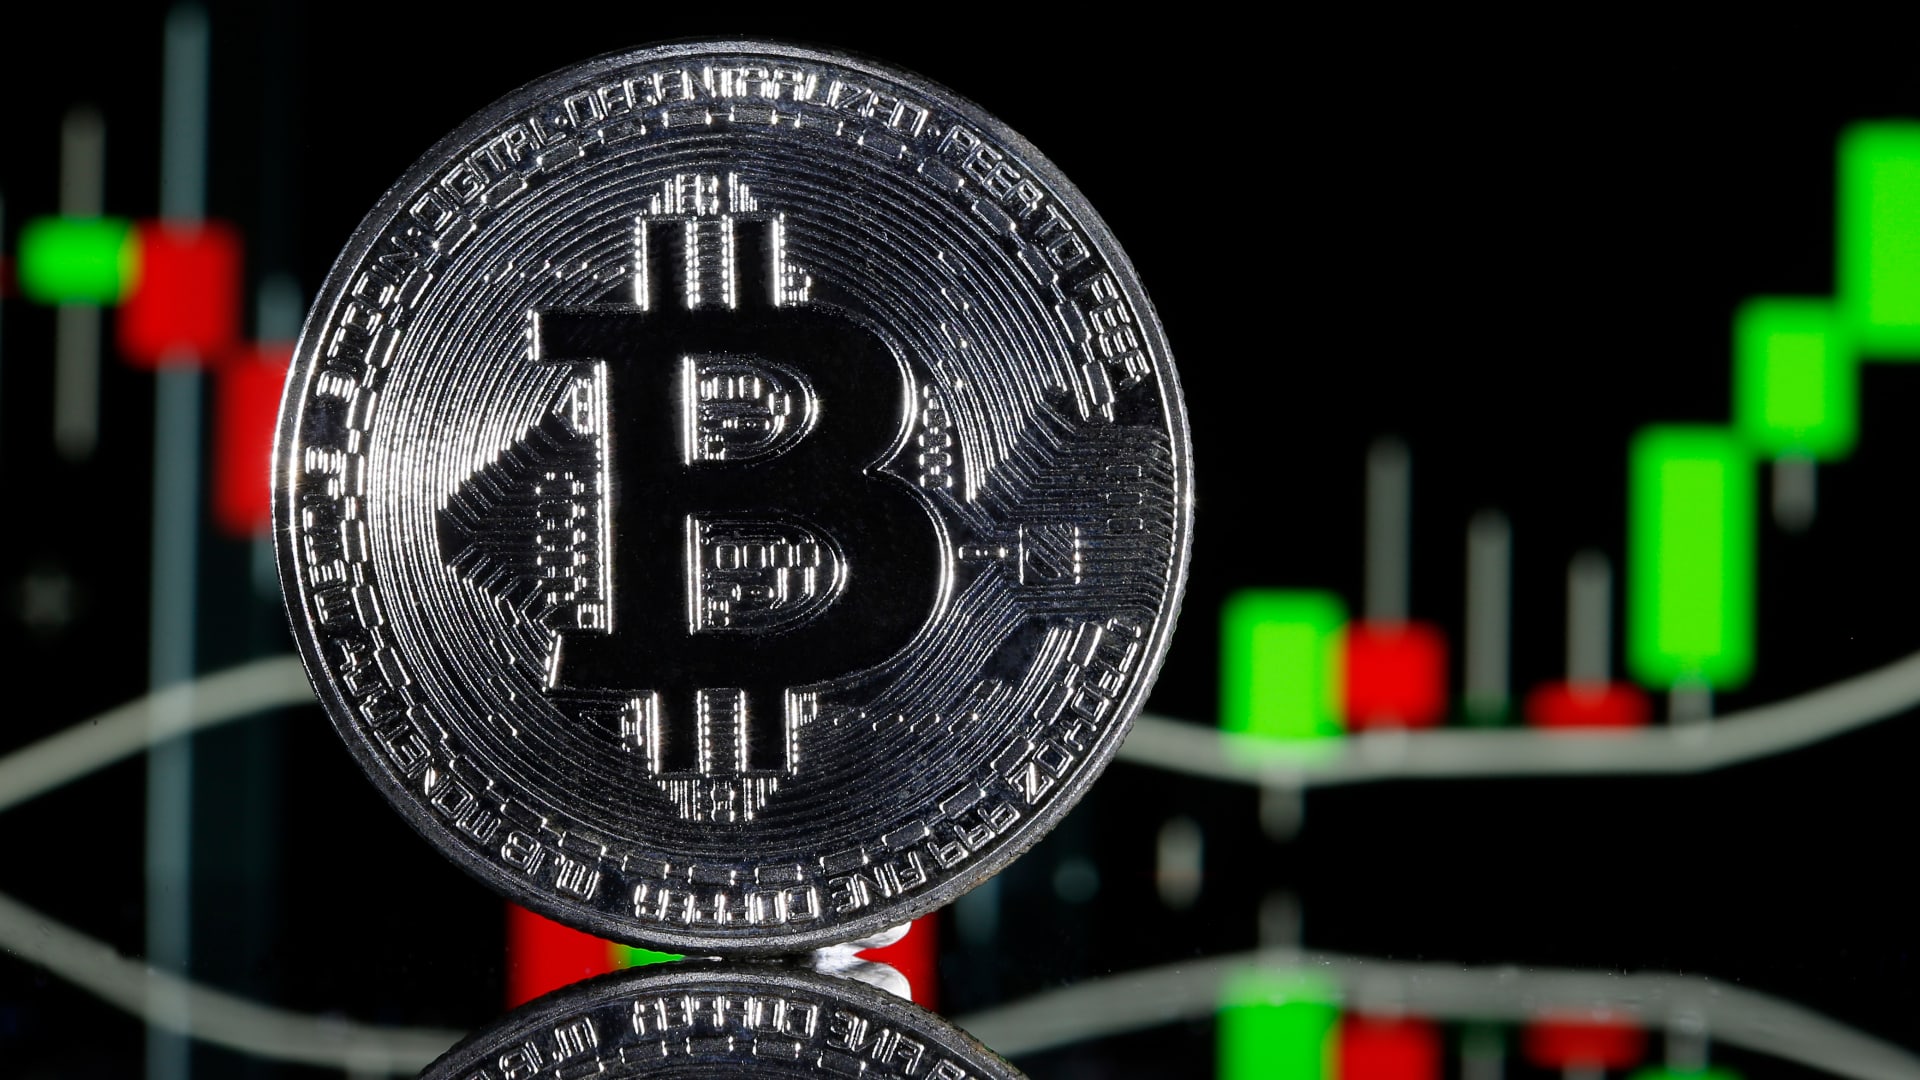 Bitcoin Price Tumbles After Halving, Defying Expectations of a Rally